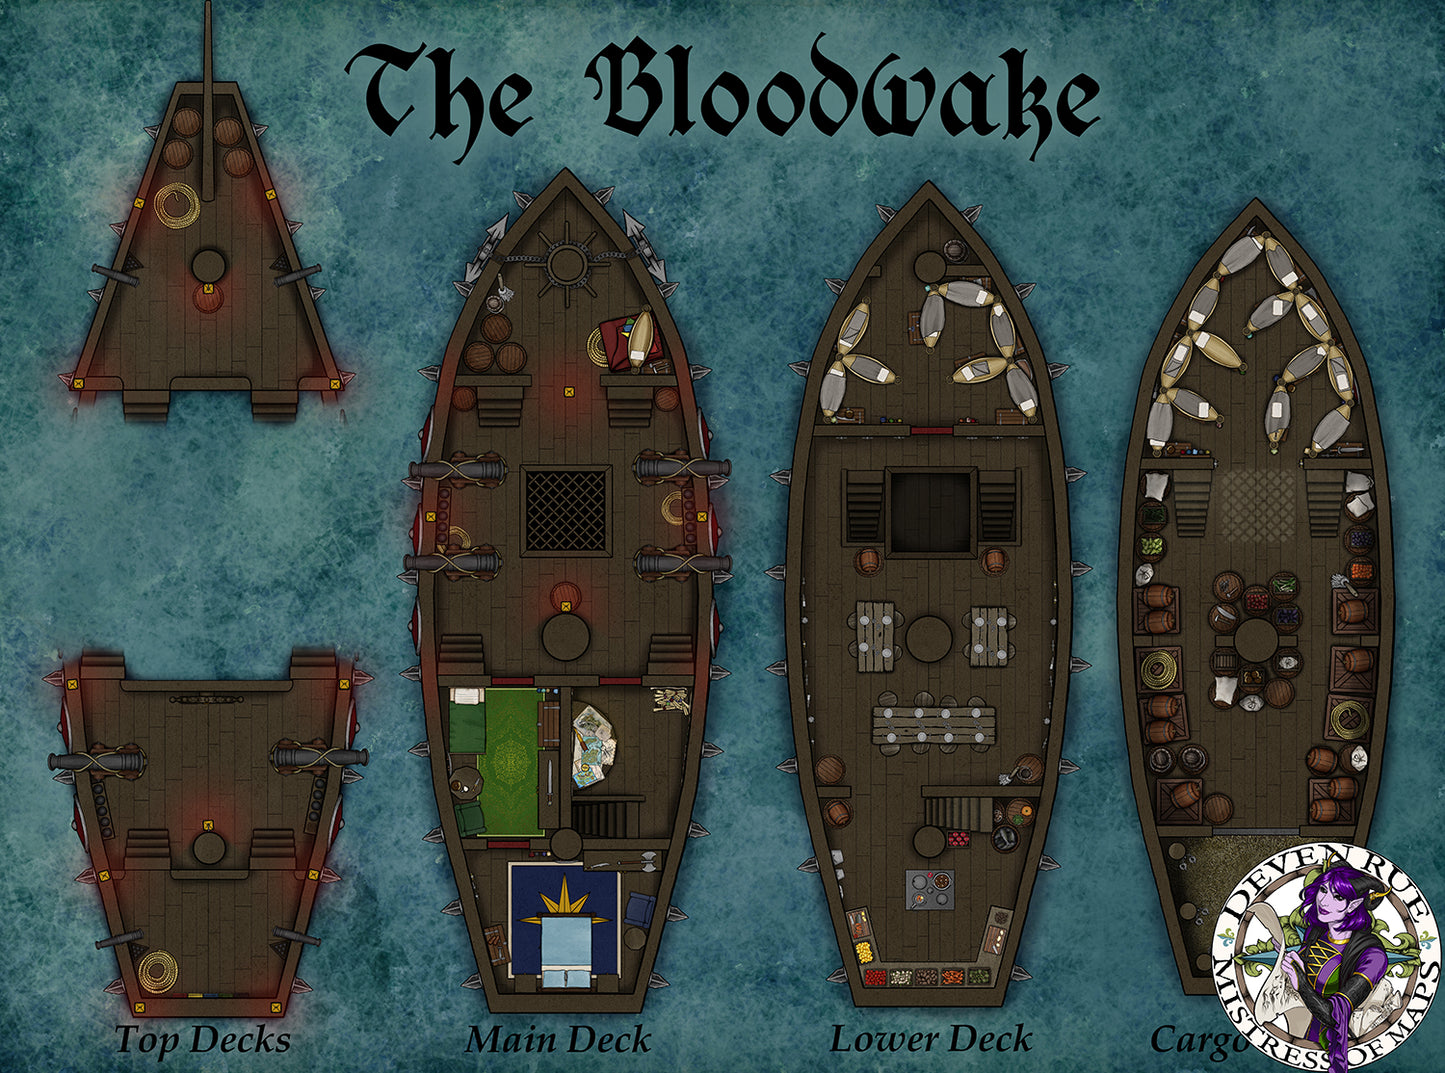 All levels of The Bloodwake pirate ship by Deven Rue.